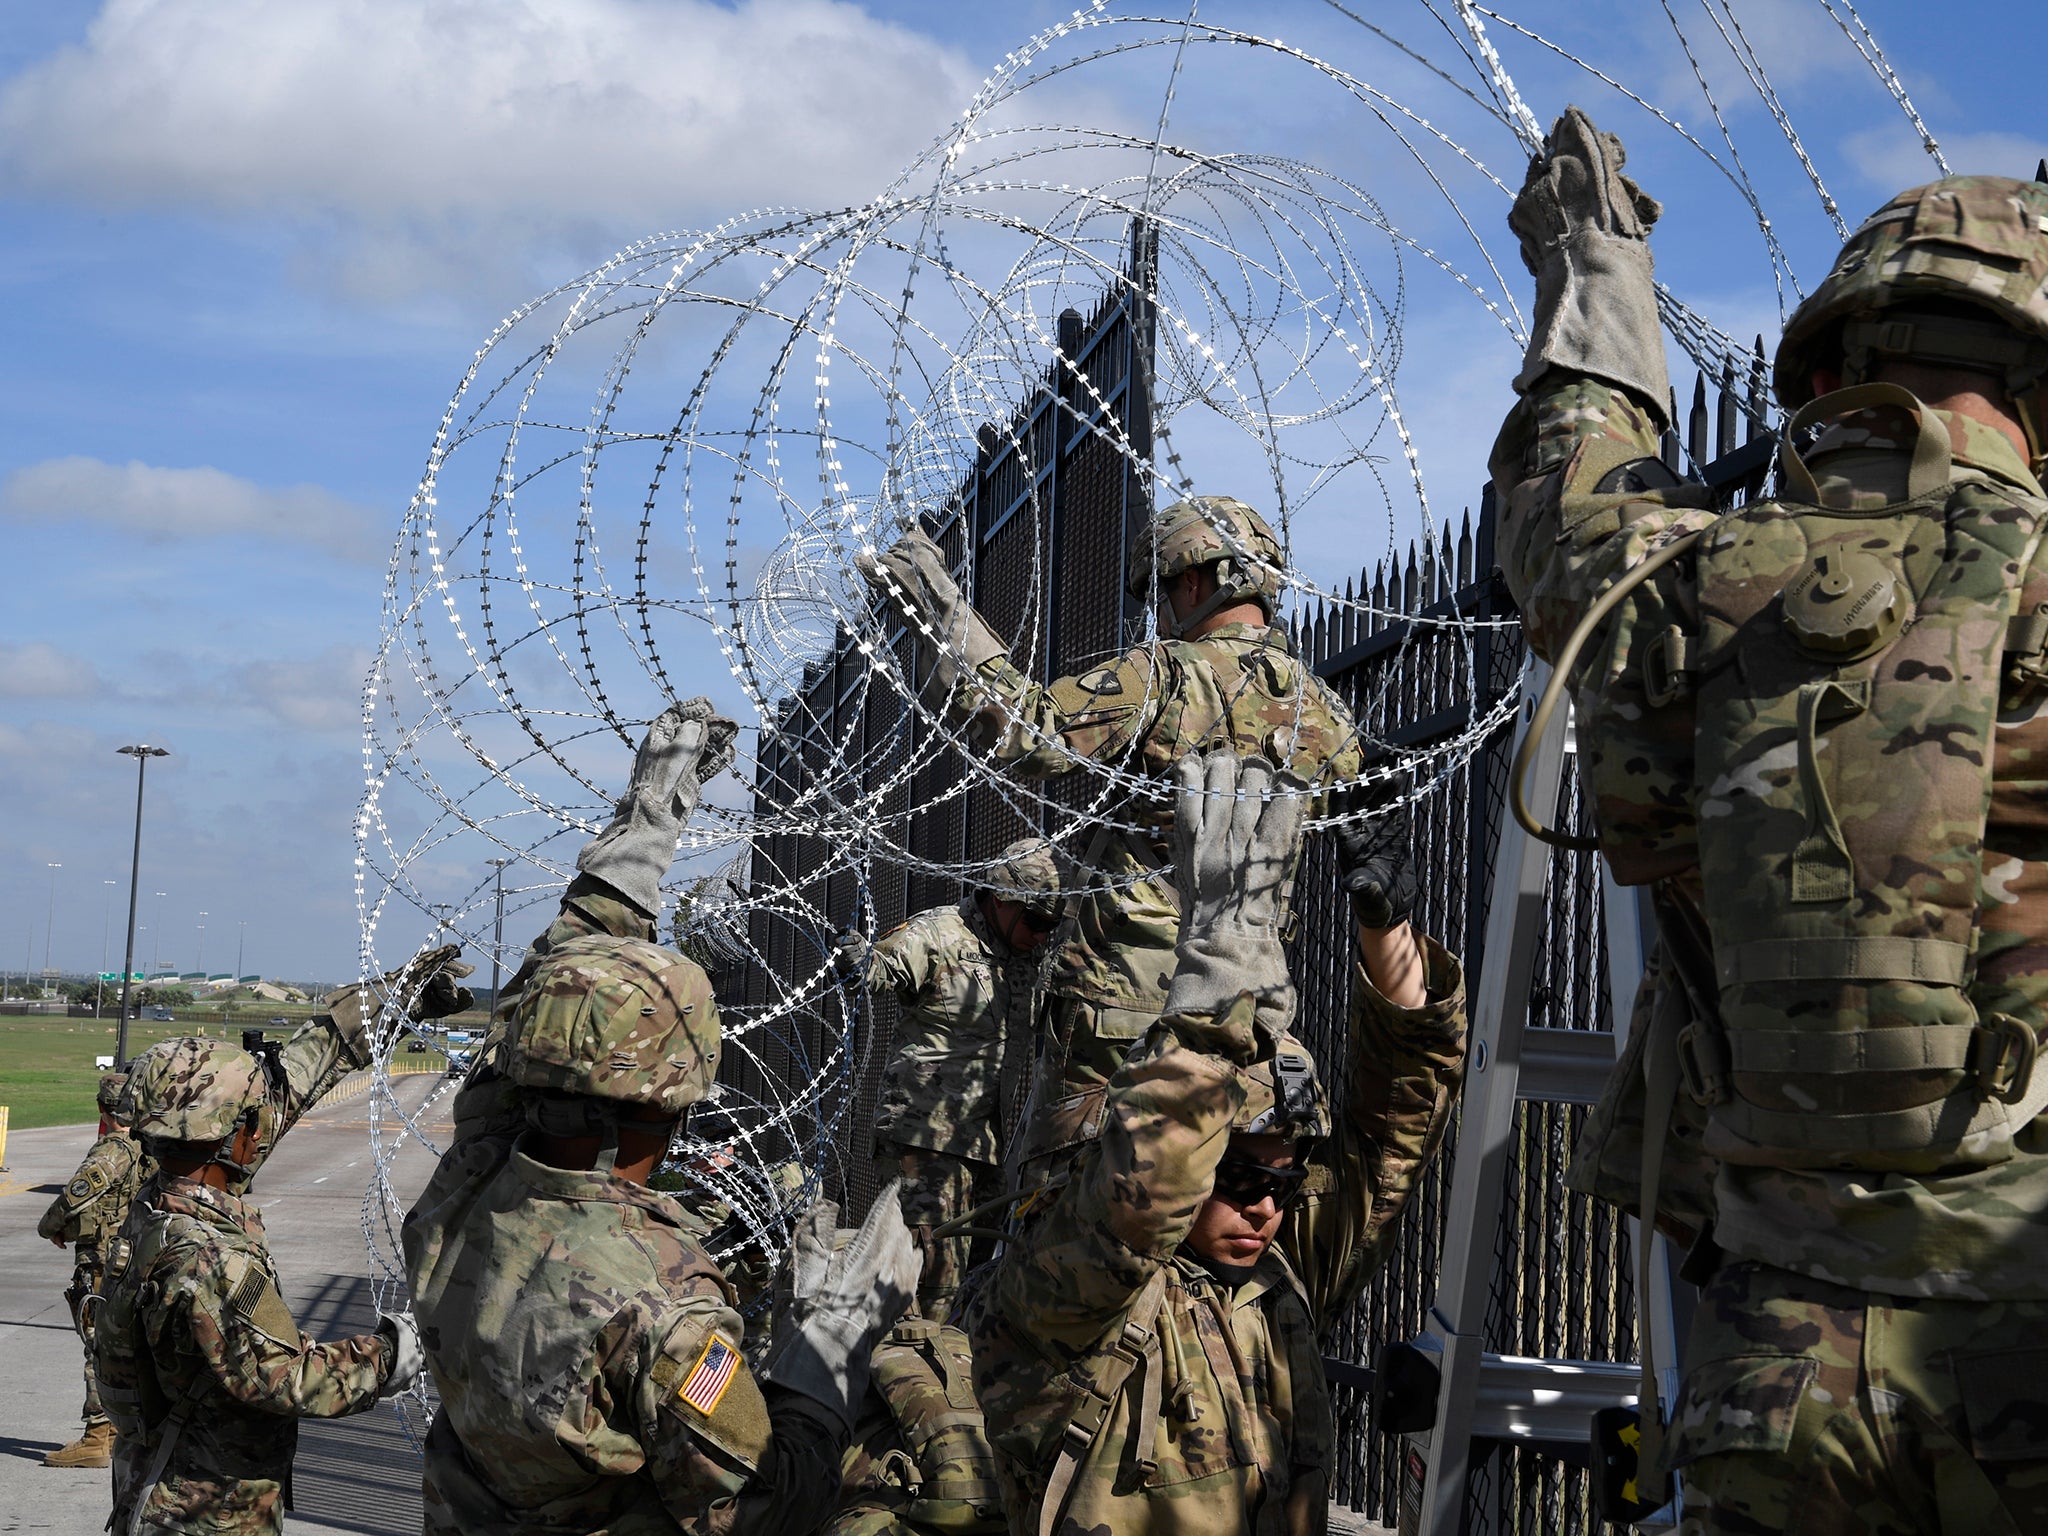 Troops currently stationed at the US-Mexico border have been ordered to string more concertina wire and install detection systems in remote areas, US defence official says